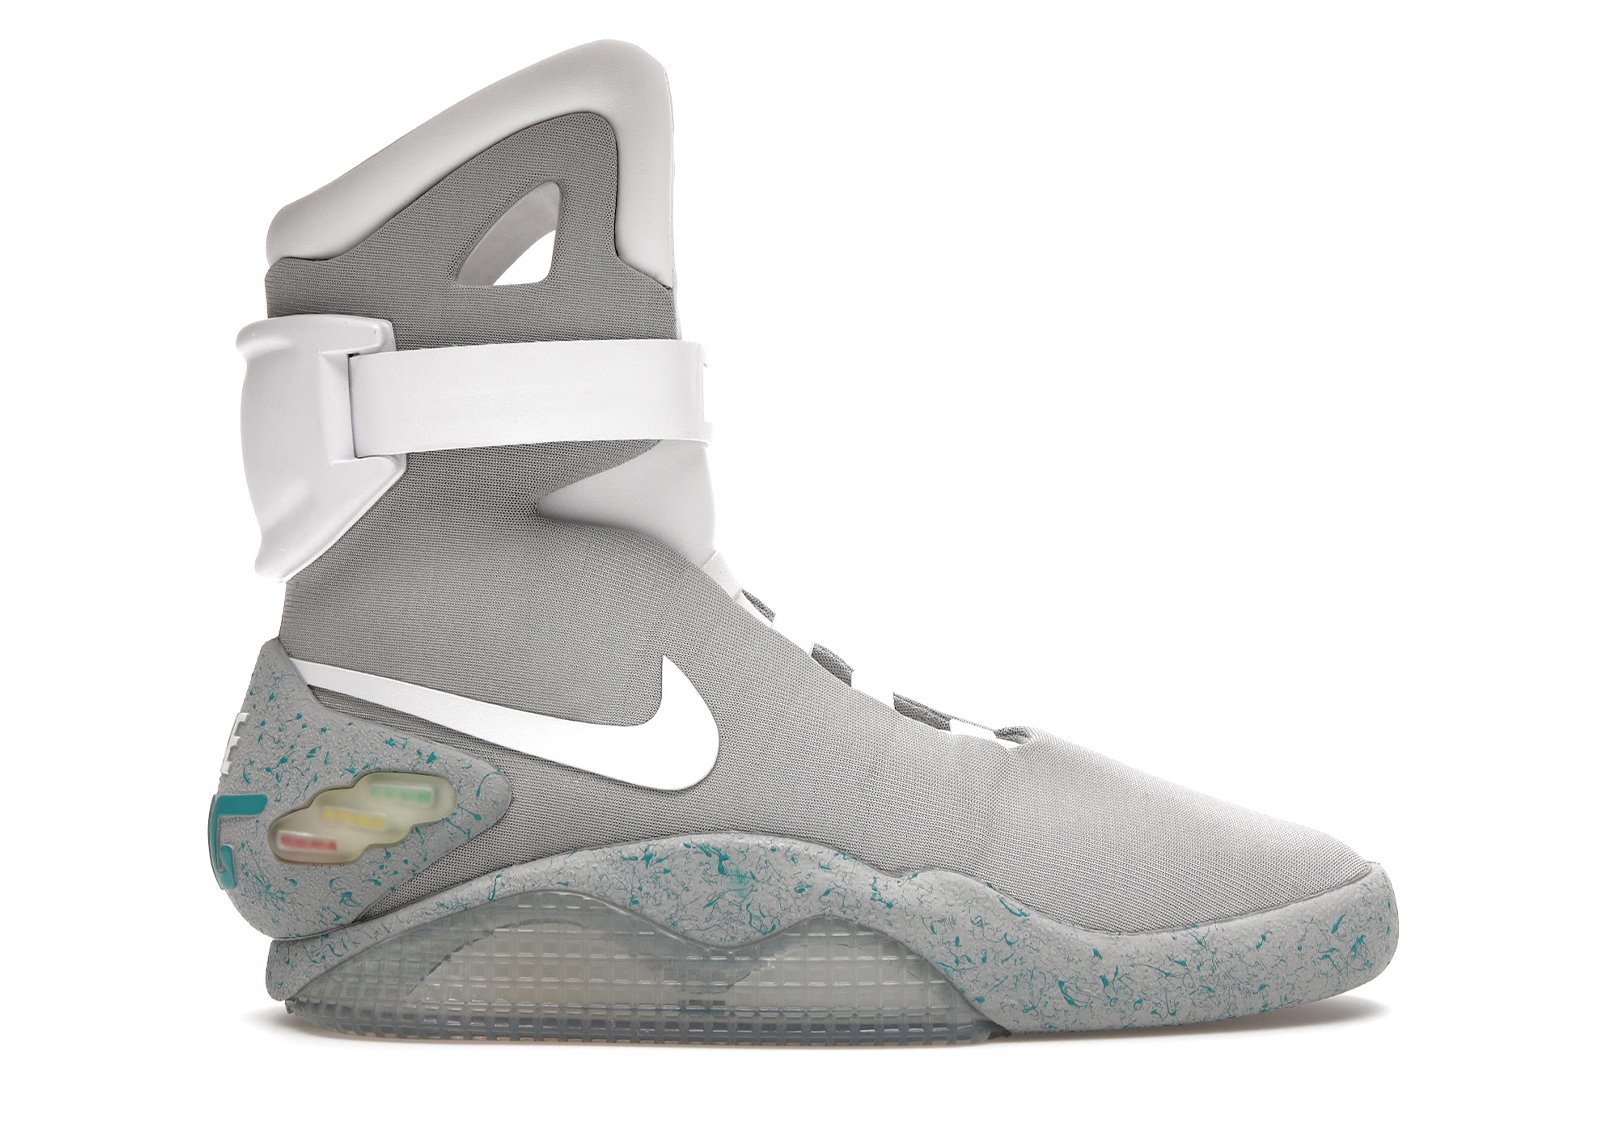 Nike MAG Back to the Future (2011) sneaker informations